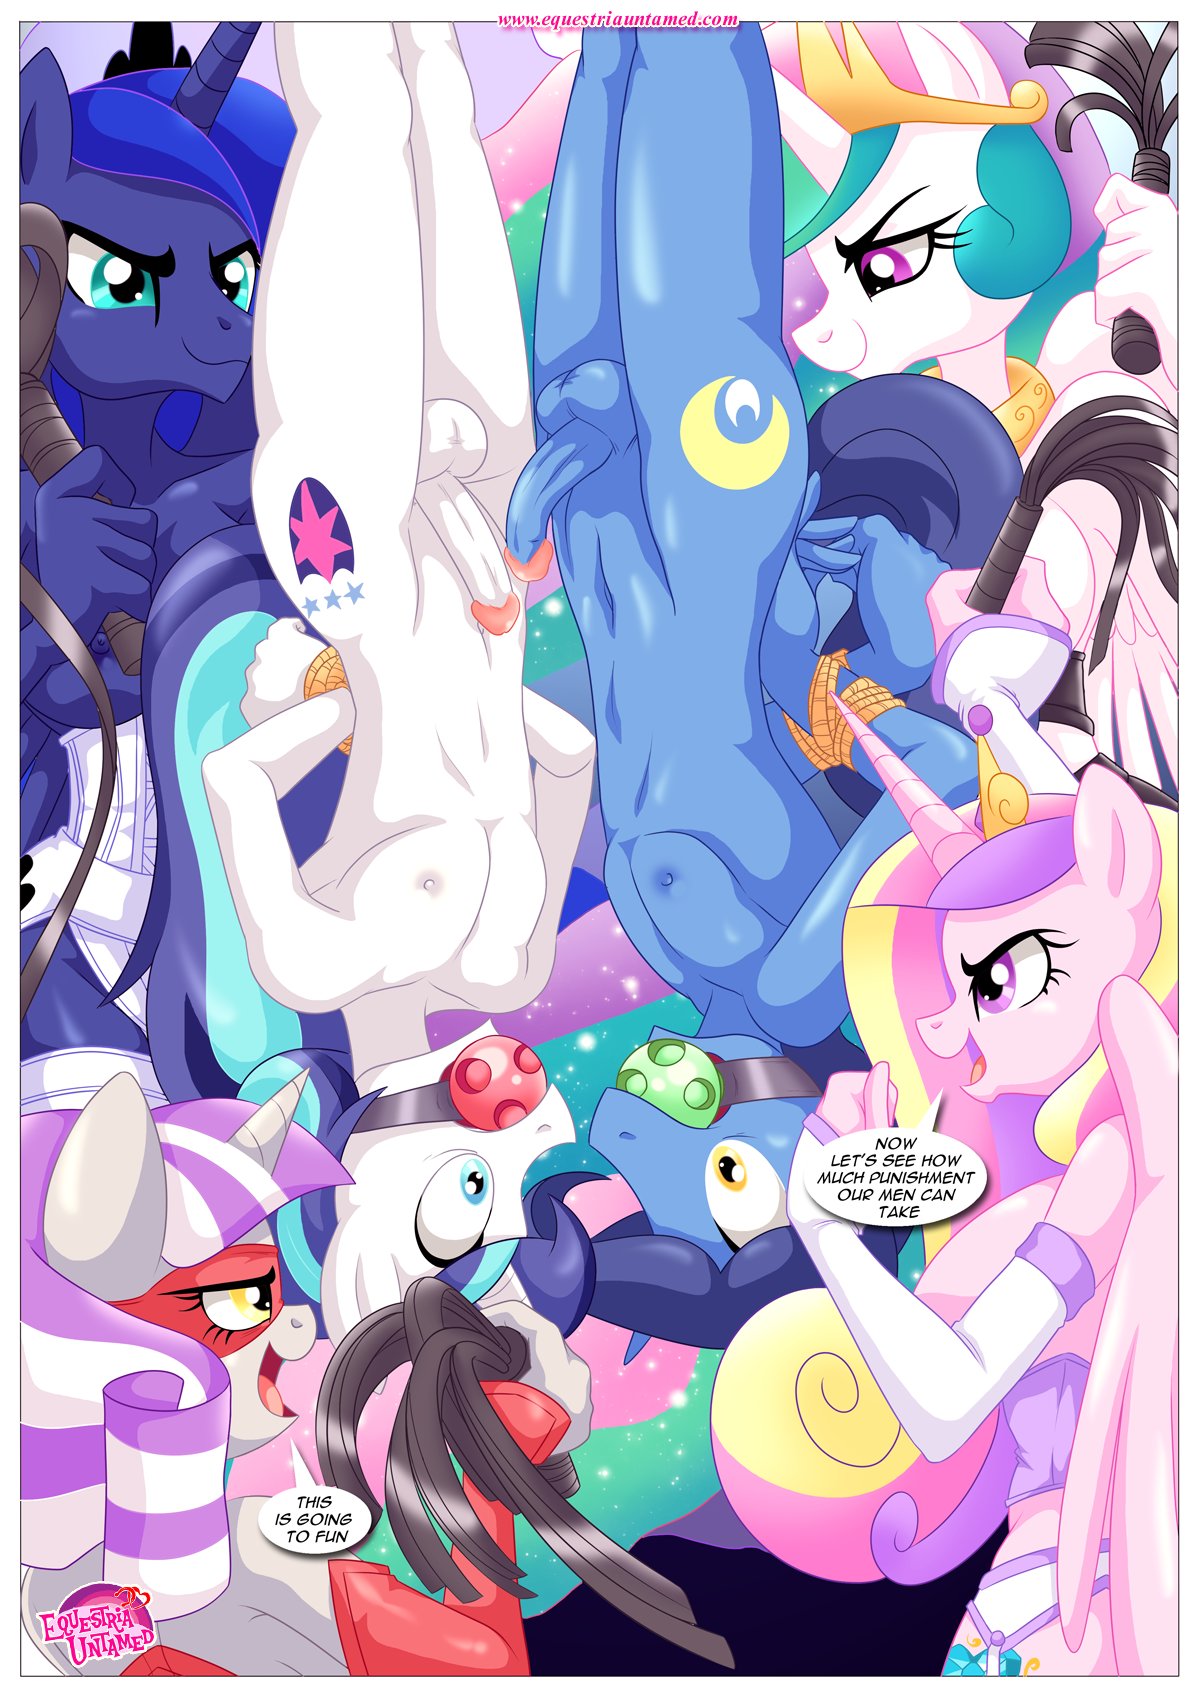 bbmbbf comic equestria_untamed friendship_is_magic my_little_pony palcomix princess_cadance princess_cadance_(mlp) princess_celestia princess_celestia_(mlp) princess_luna princess_luna_(mlp) rainbow_dash's_game_of_extreme_pda shining_armor shining_armor_(mlp)